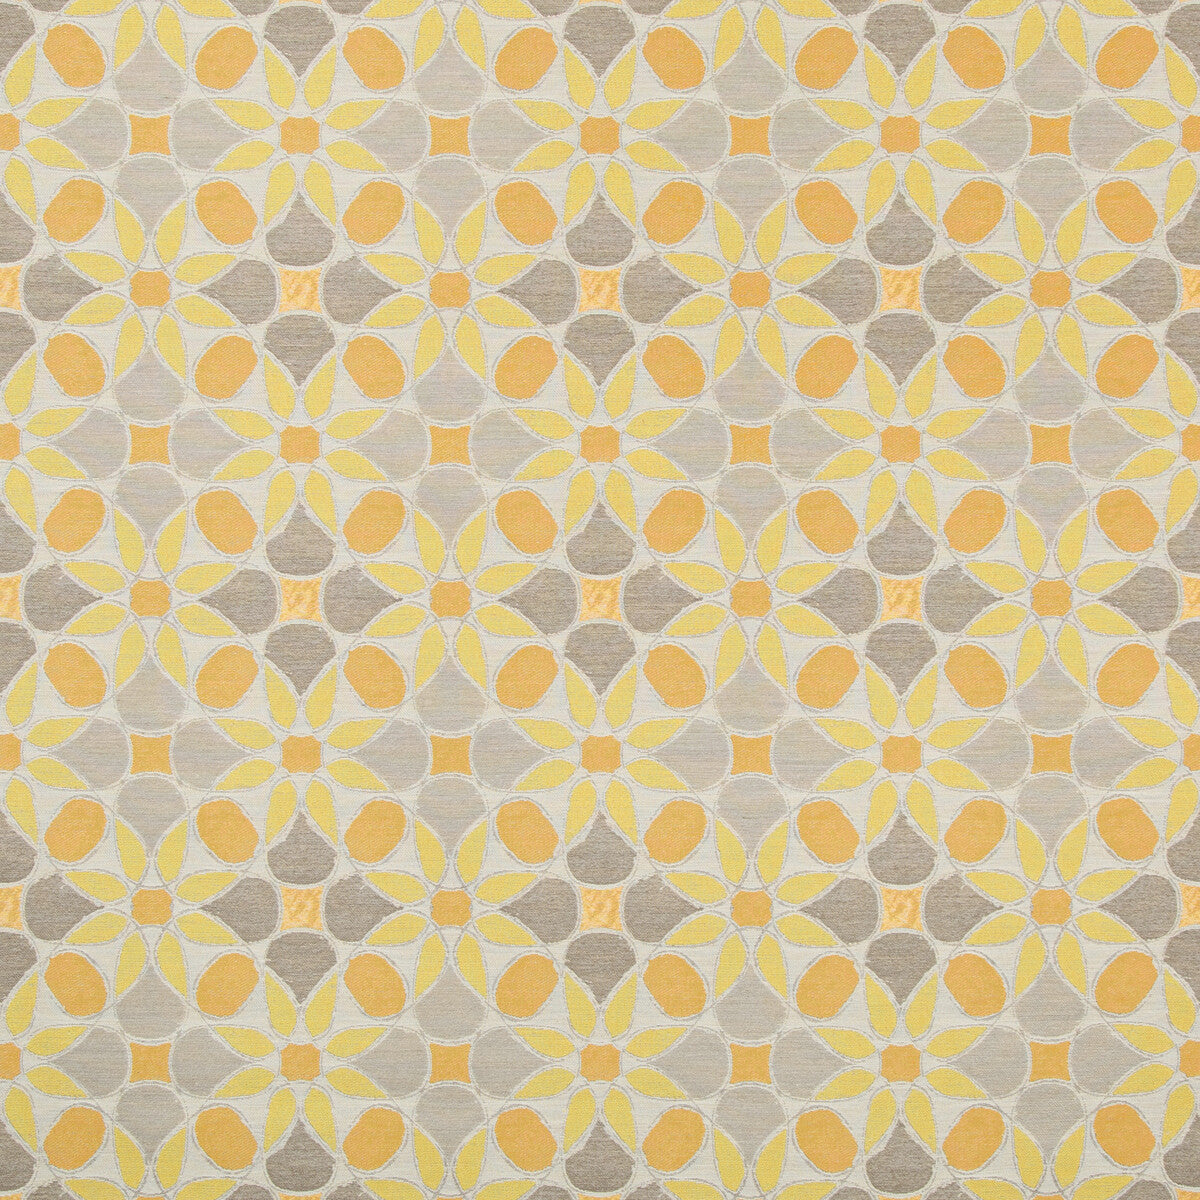 Tiepolo fabric in citrus color - pattern 35882.411.0 - by Kravet Contract in the Gis Crypton Green collection